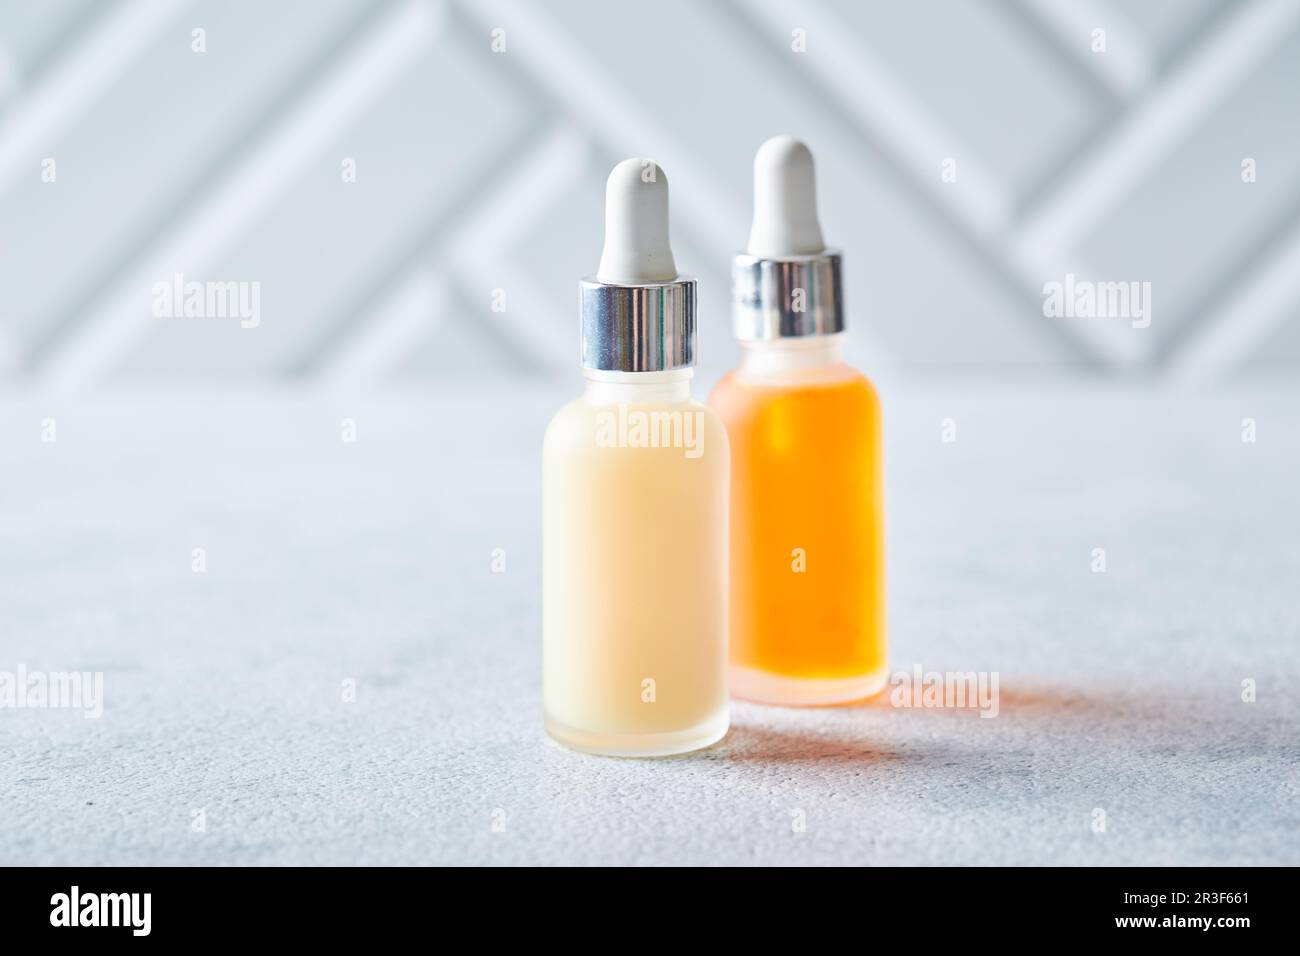 Glass bottles with face or body skin care products on a light background. Self-care, cosmetics, beauty practices, self-care conc Stock Photo